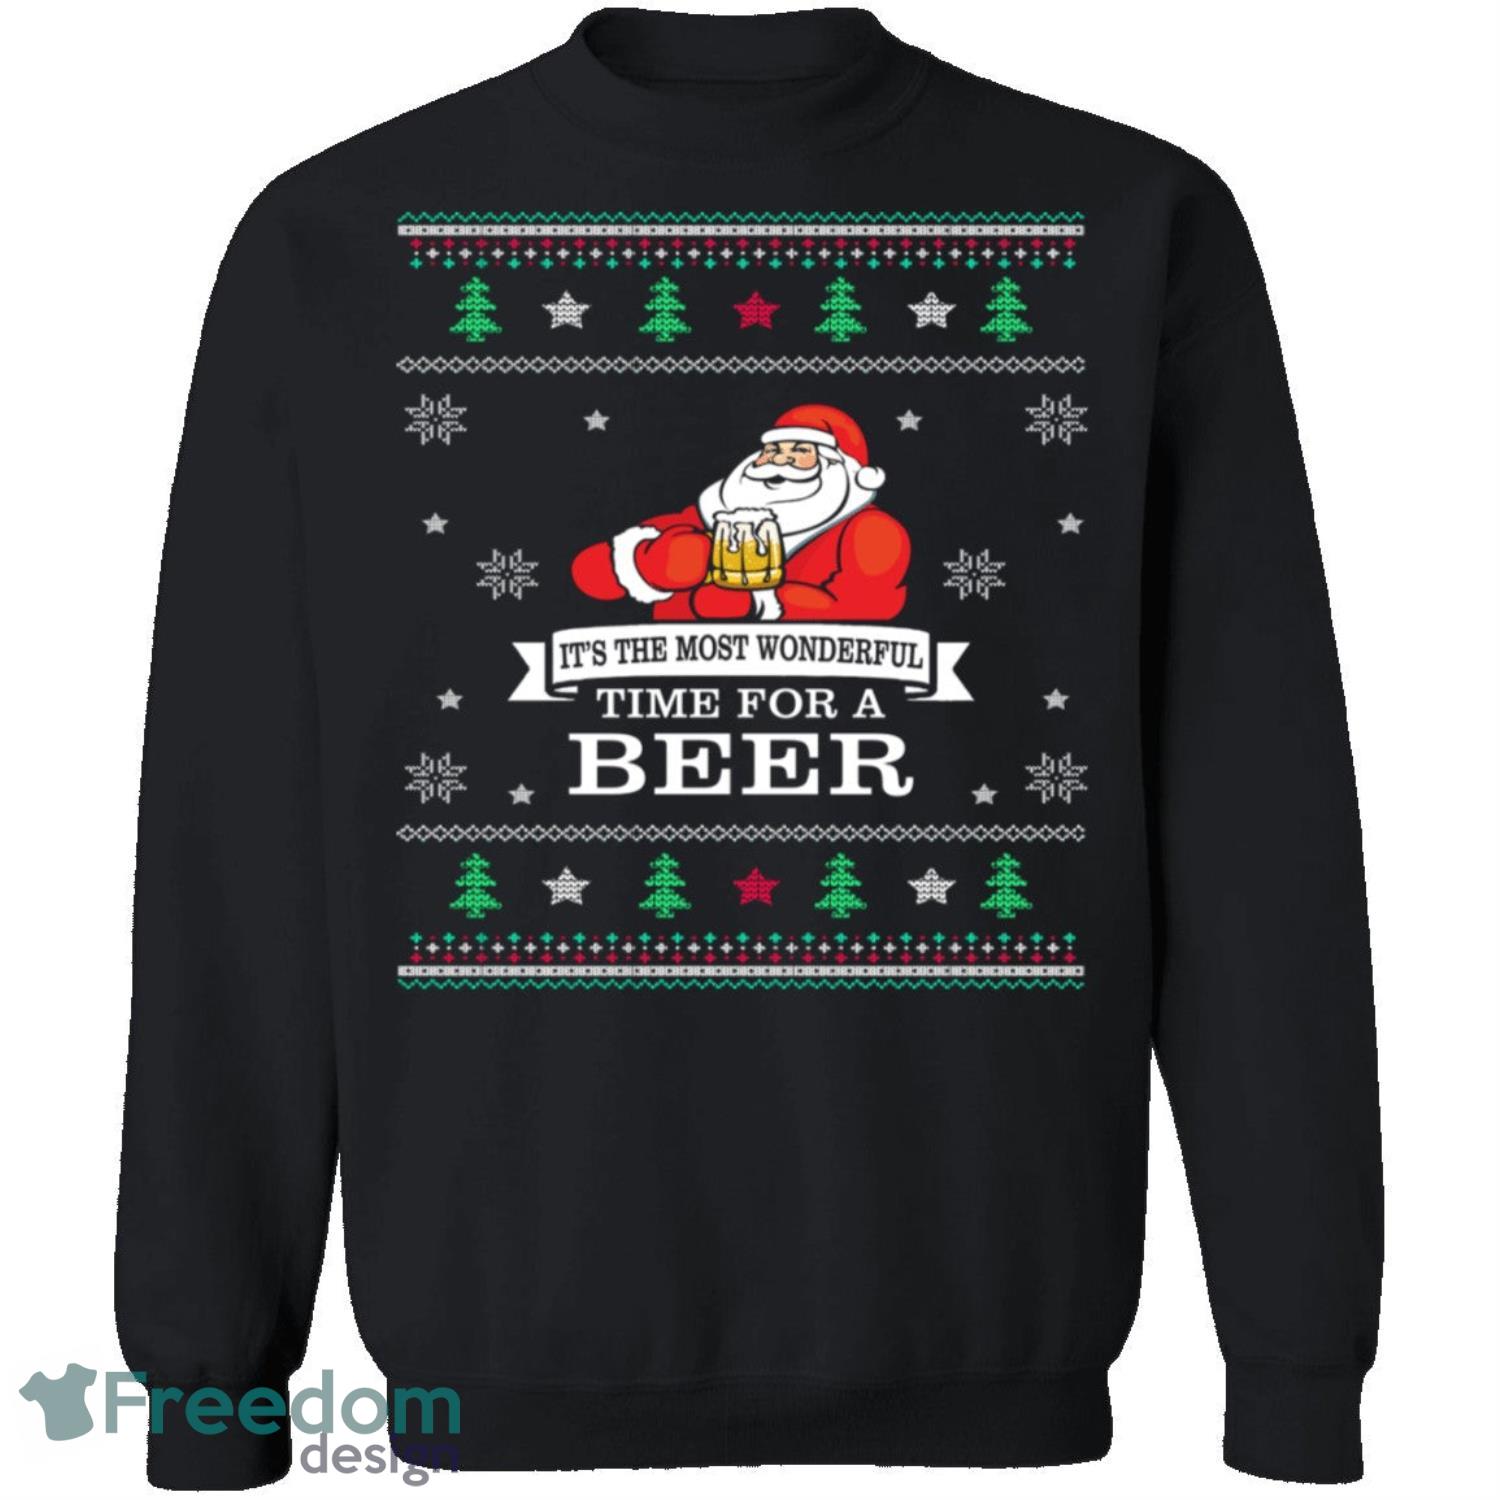 Beer Knitting Pattern Ugly Christmas Sweatshirt - beer-knitting-pattern-ugly-christmas-sweatshirt-2